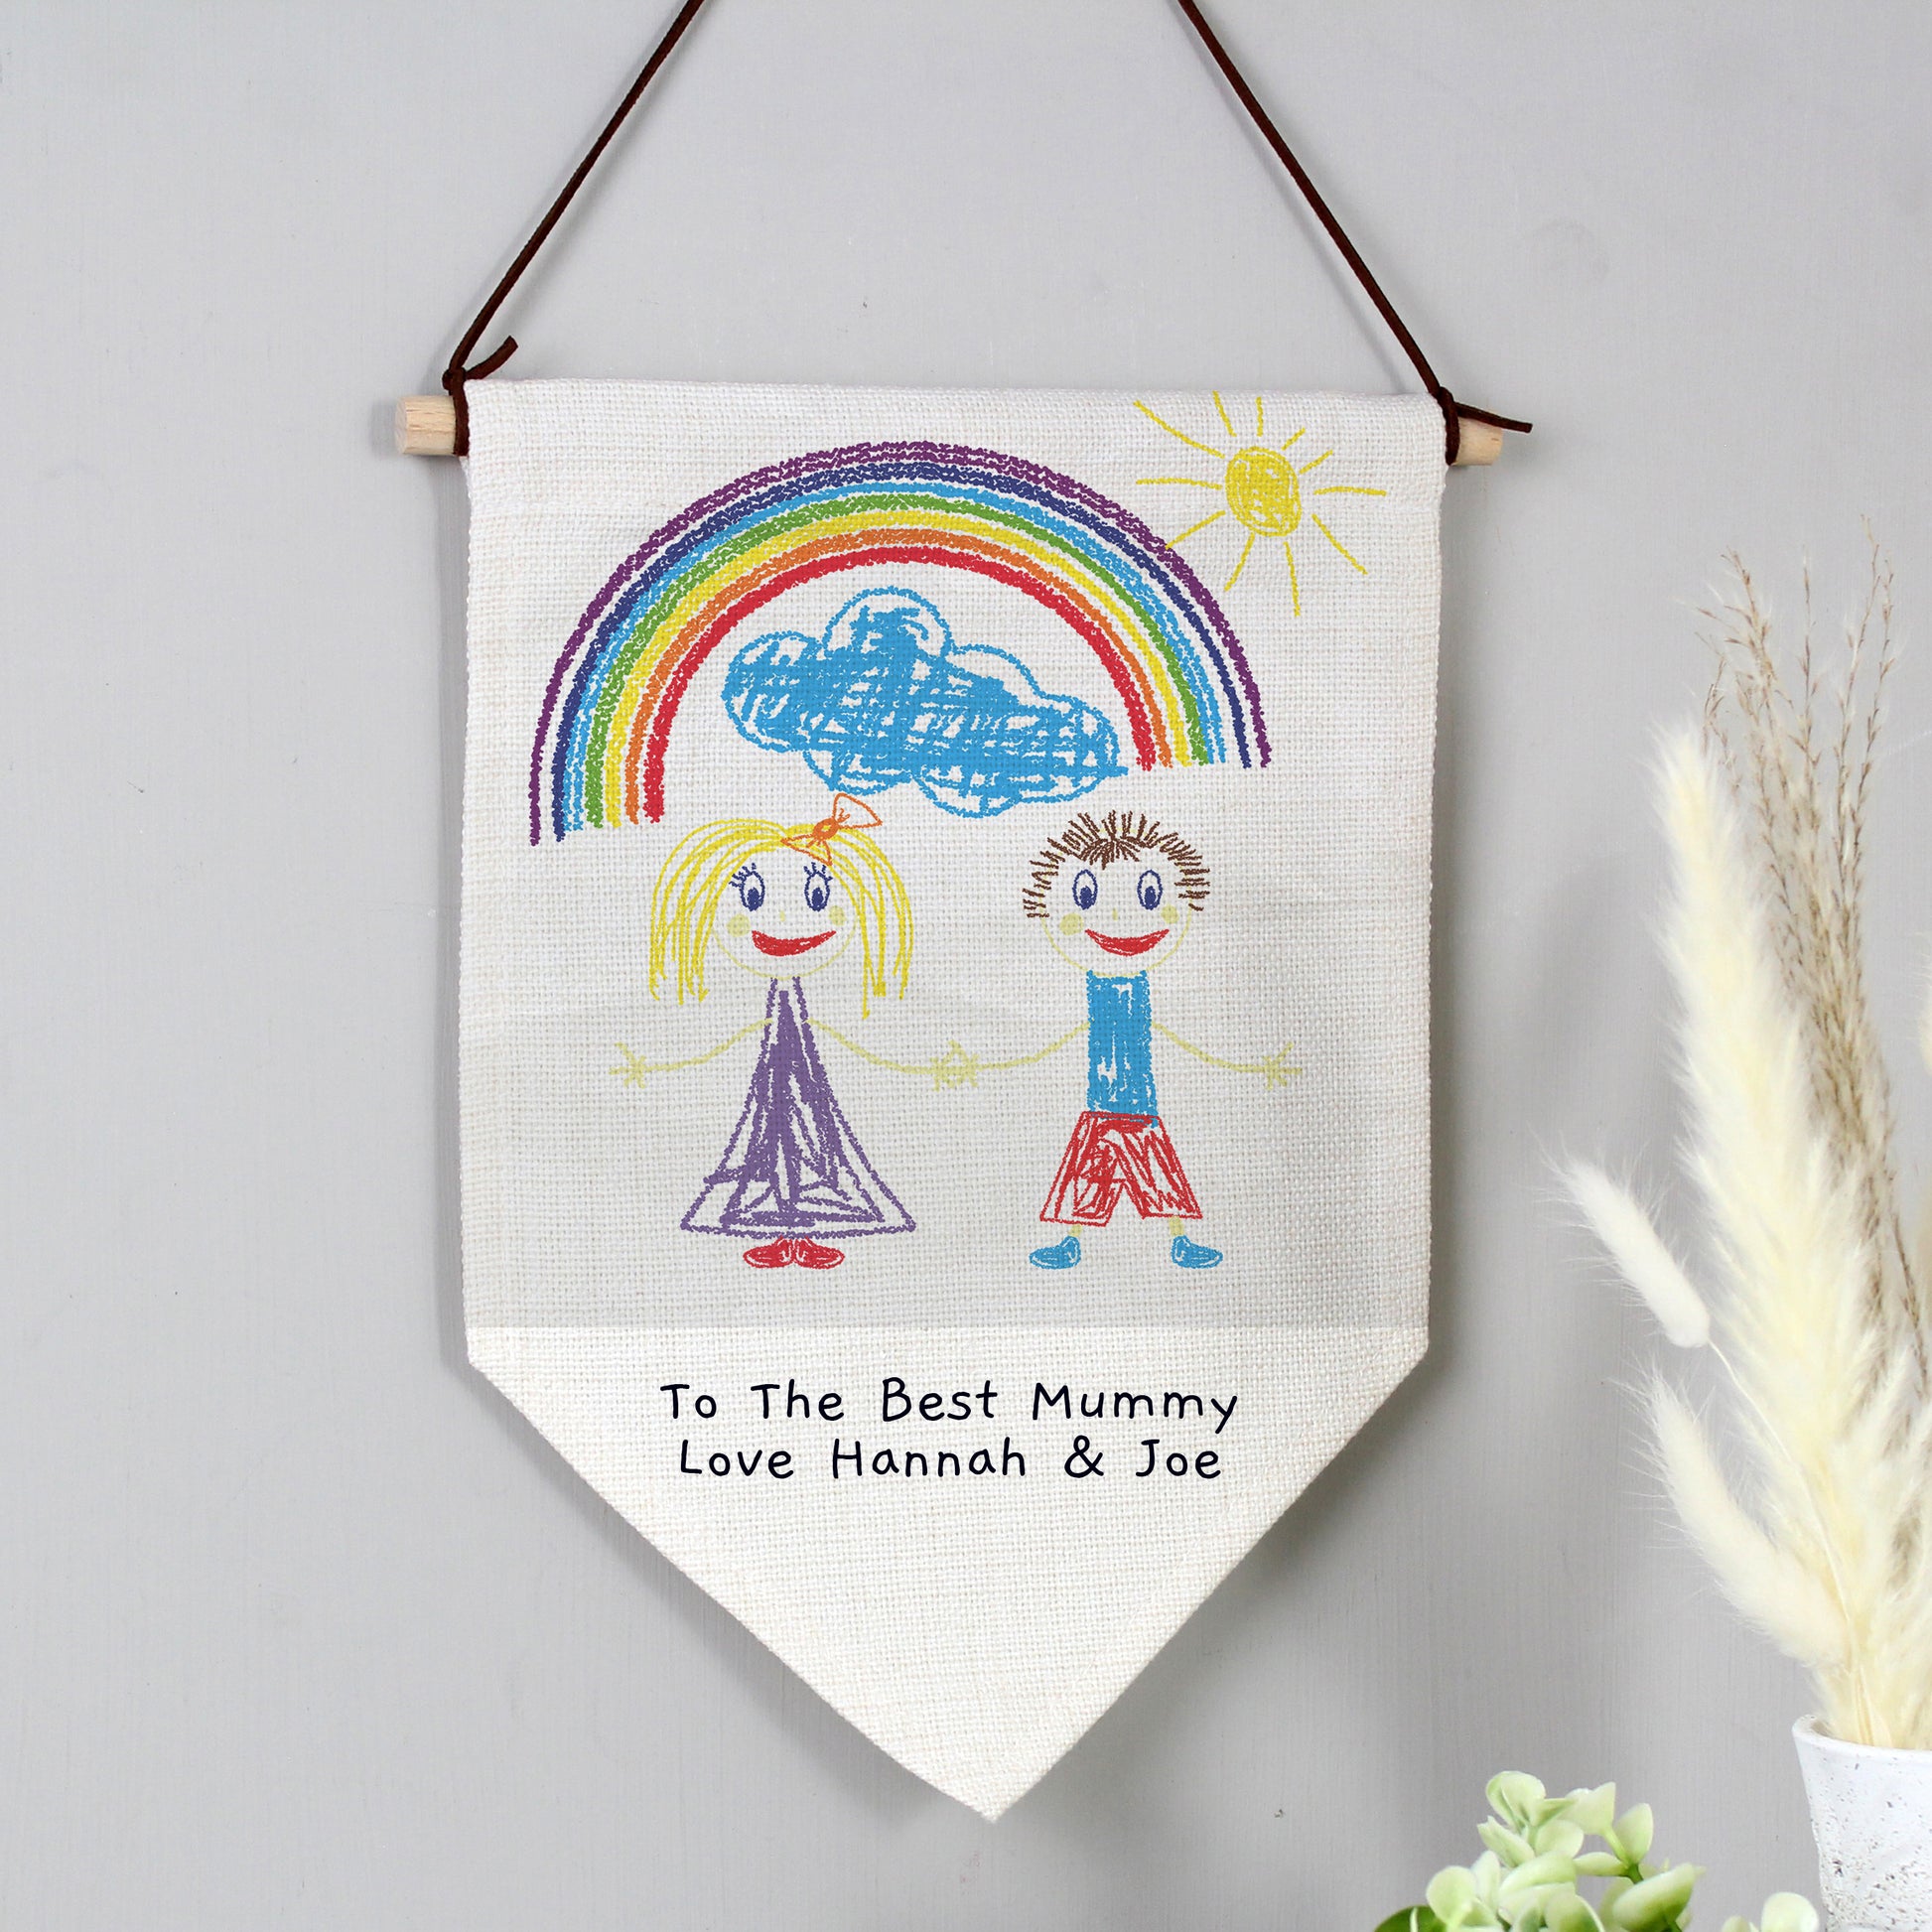 Personalised Canvas Hanging Banner - UPLOAD YOUR OWN ARTWORK! - Violet Belle Gifts - Personalised Canvas Hanging Banner - UPLOAD YOUR OWN ARTWORK!